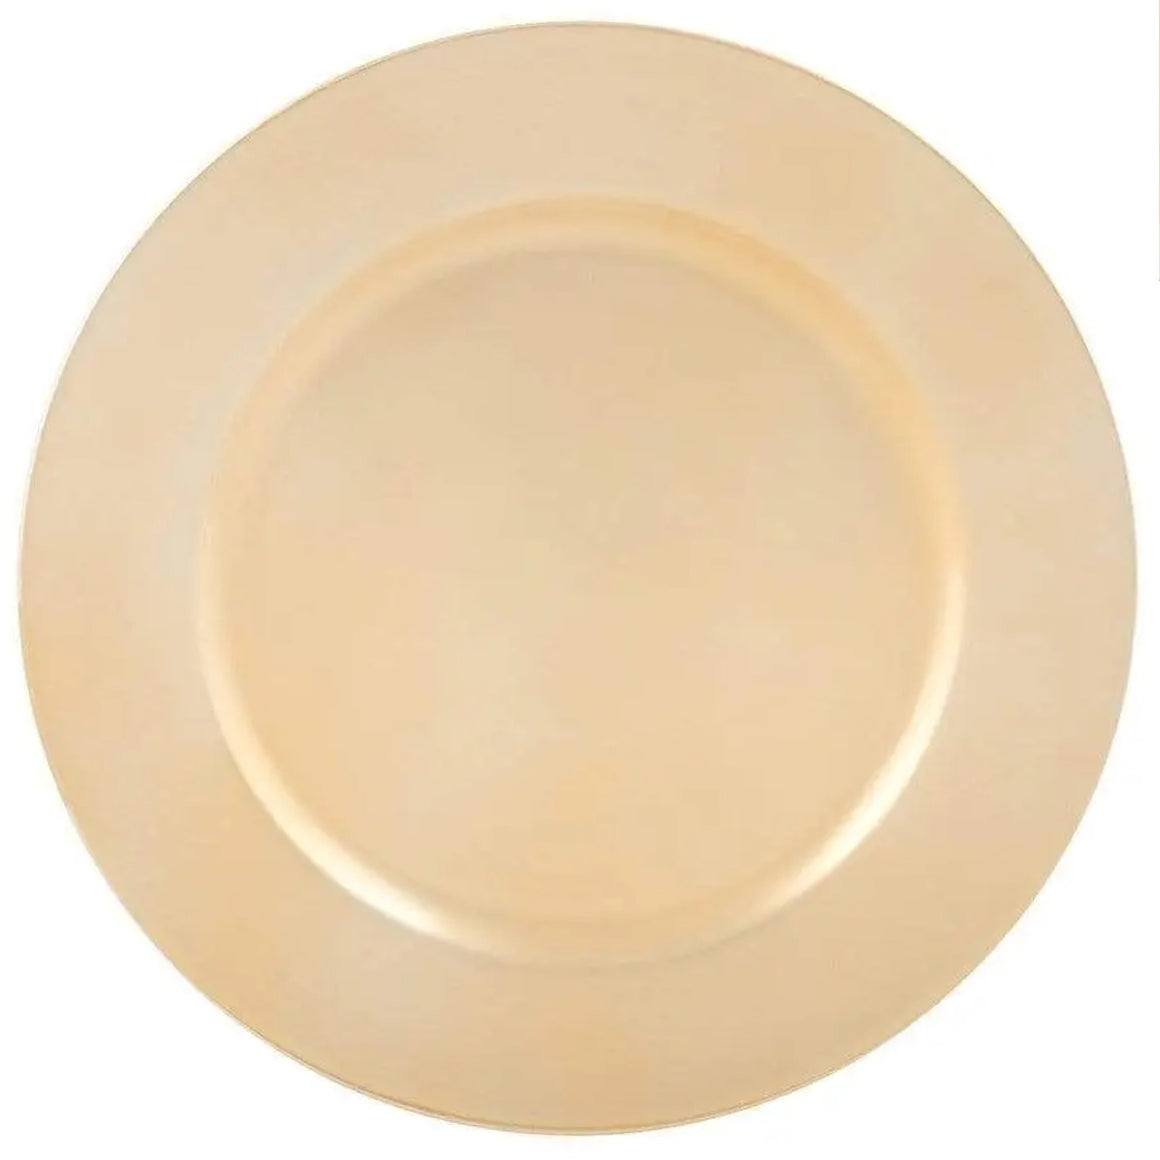 PLATES CHARGER - EXTRA LARGE MATTE GOLD